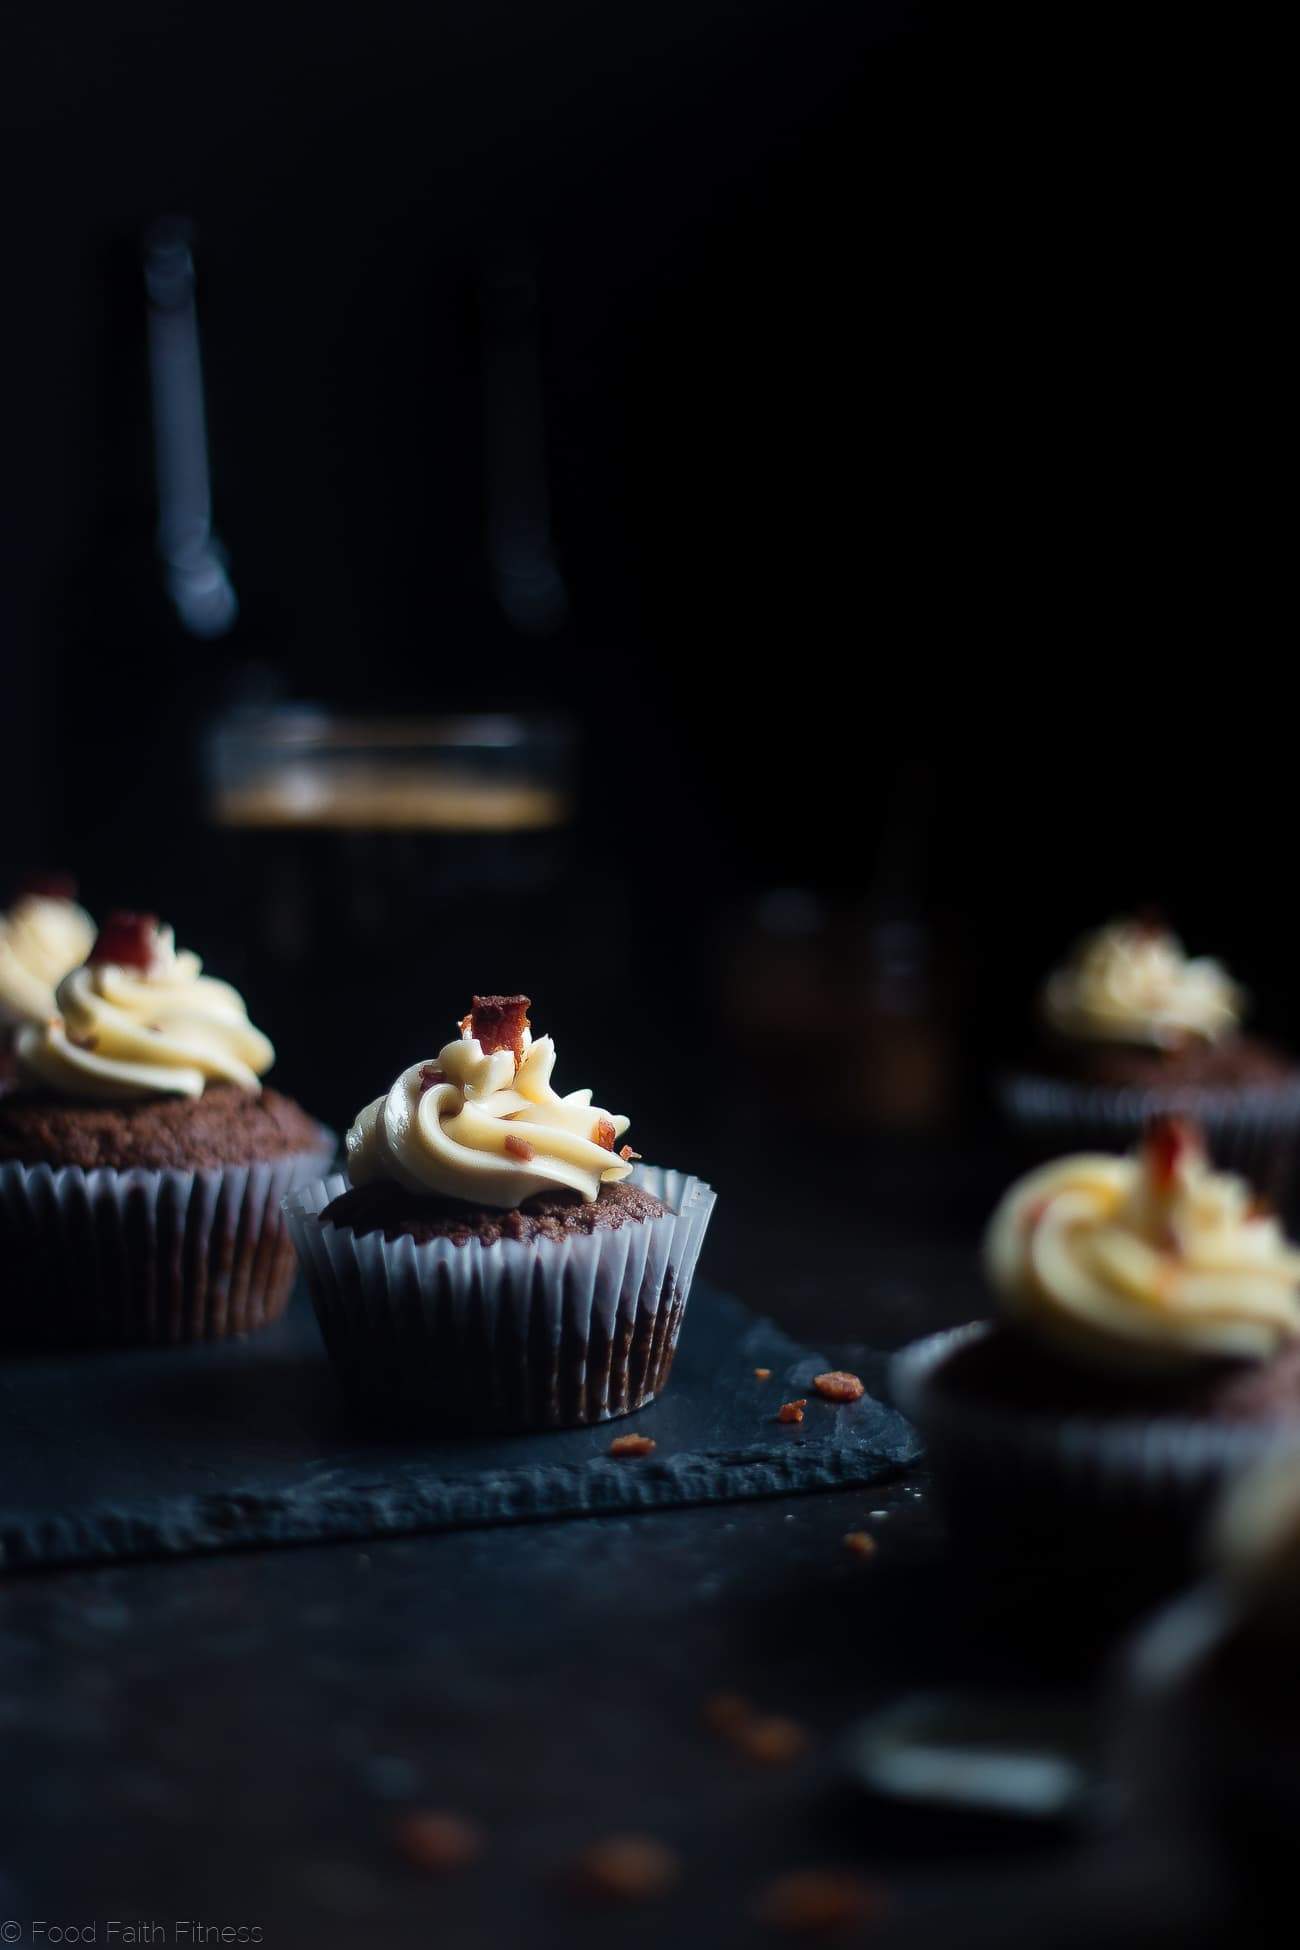 Gluten Free Chocolate Bacon Beer Cupcakes - These gluten free beer cupcakes have a secret, salty bacon twist and bacon fat buttercream! They're an easy dessert that's perfect for St Patrick's Day! | Foodfaithfitness.com | @FoodFaithFit